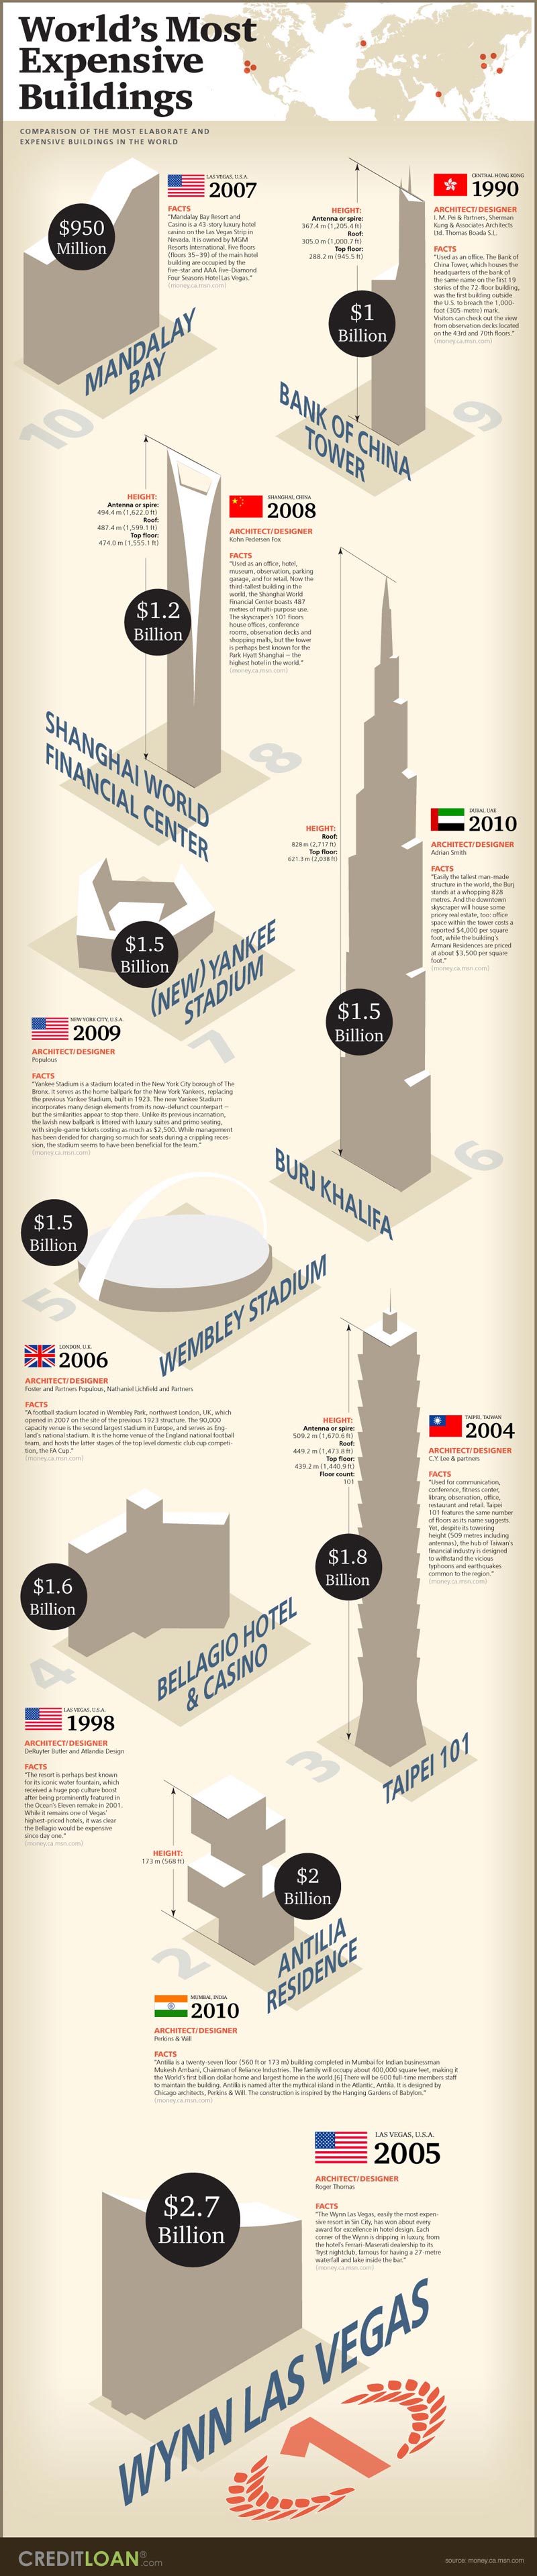 most expensive buildings in the world